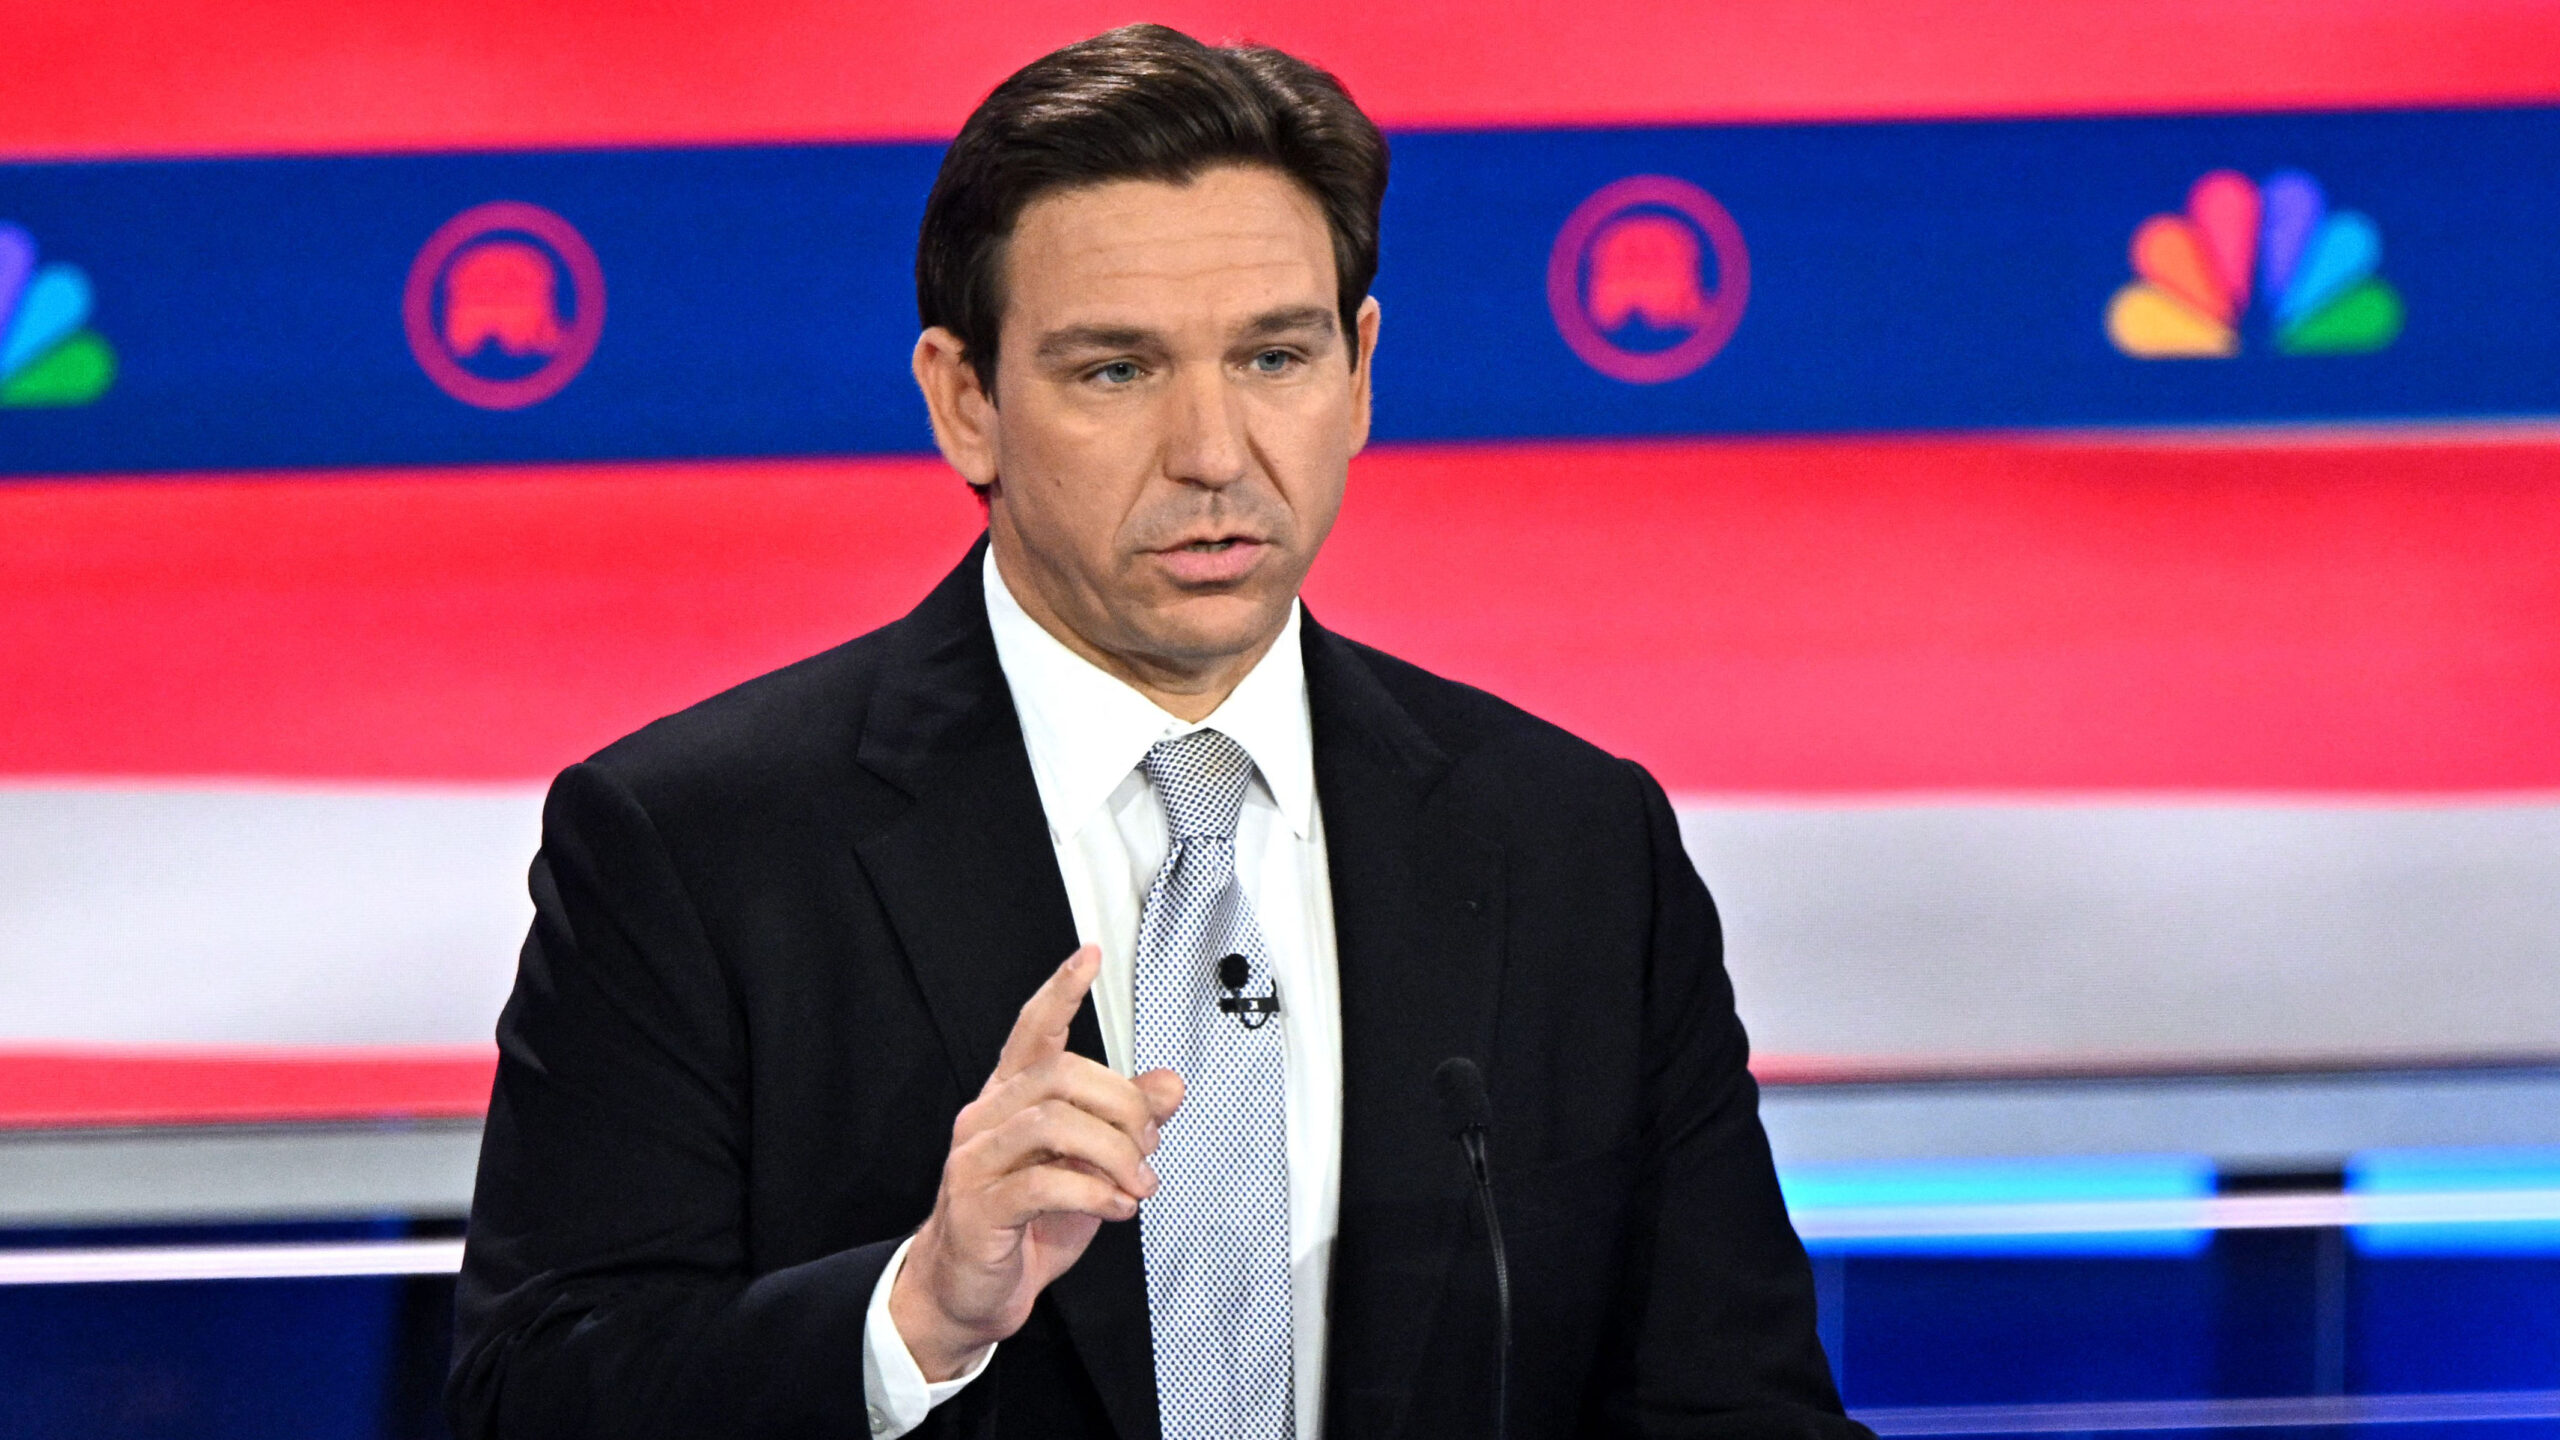 DeSantis Makes His Case On Why He, Not Trump, Should Be The GOP Nominee